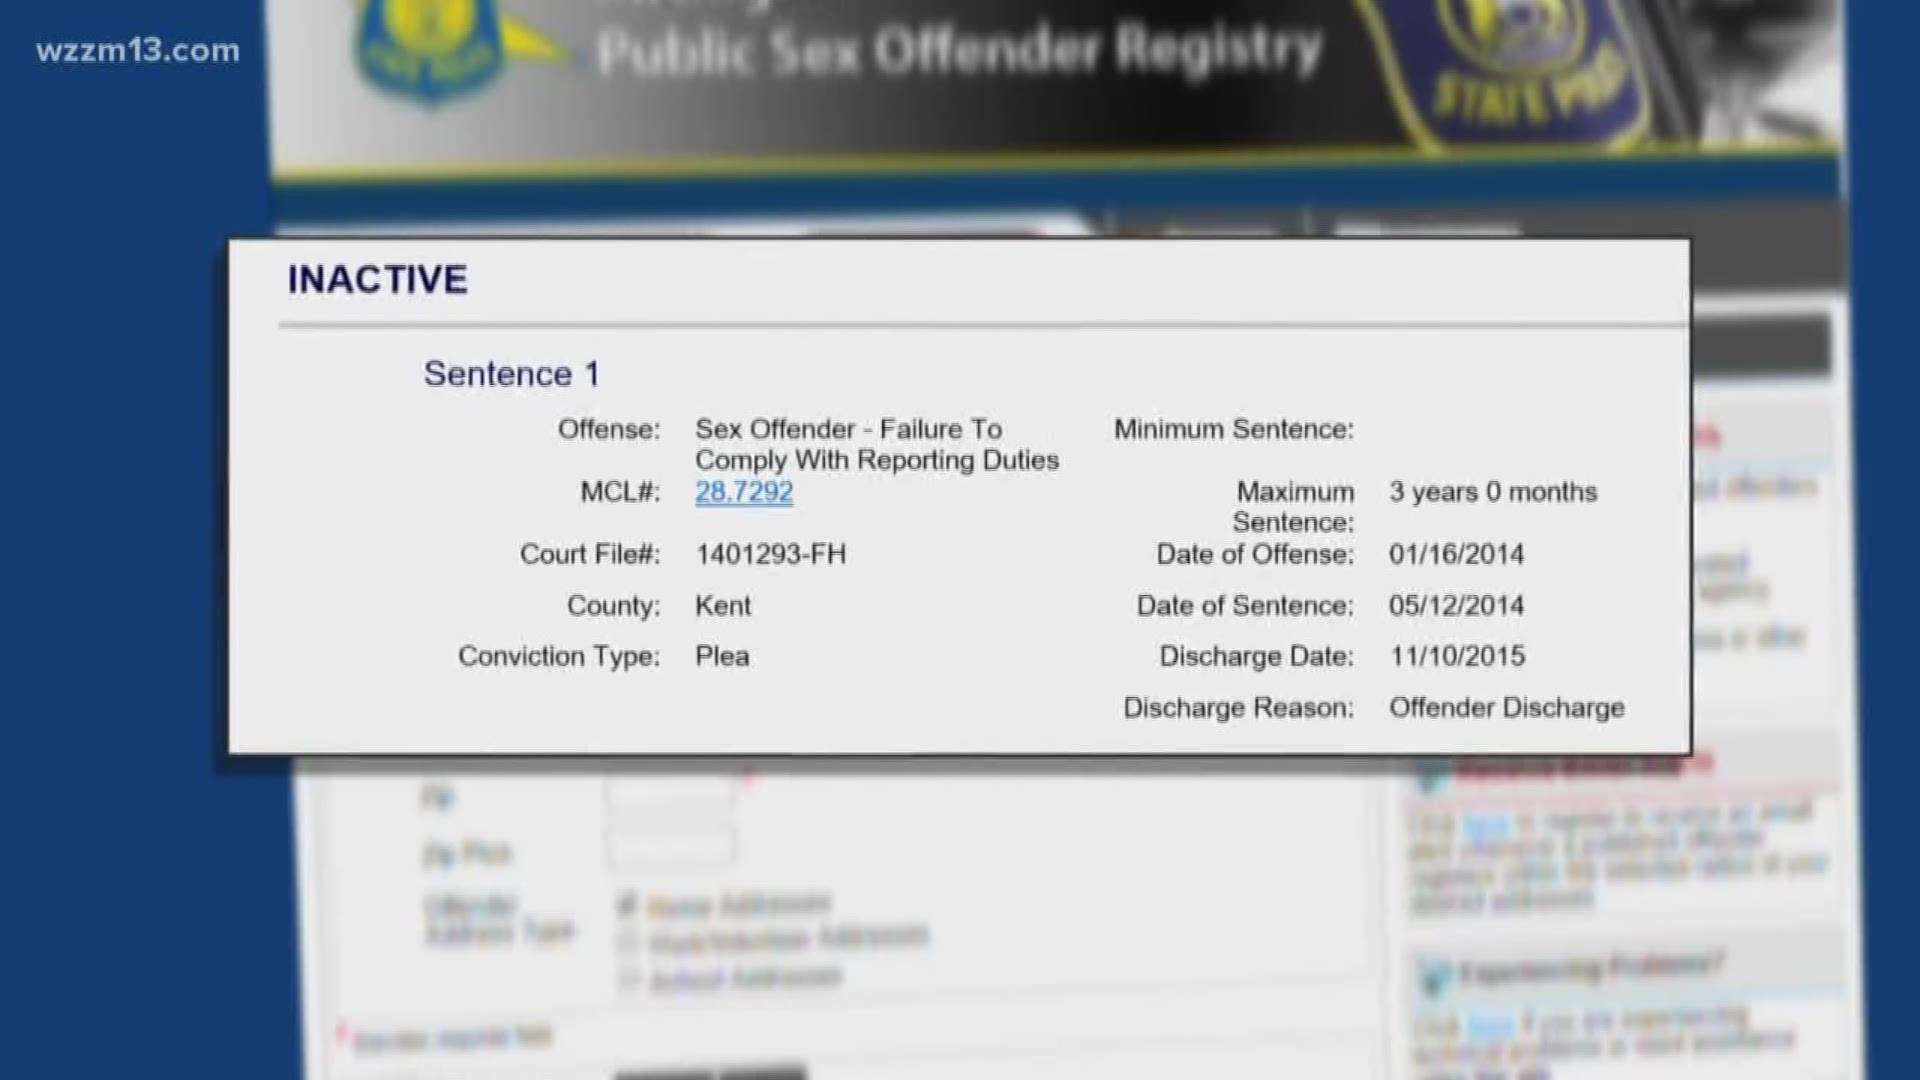 Man accused urinating on child on sex offender registry